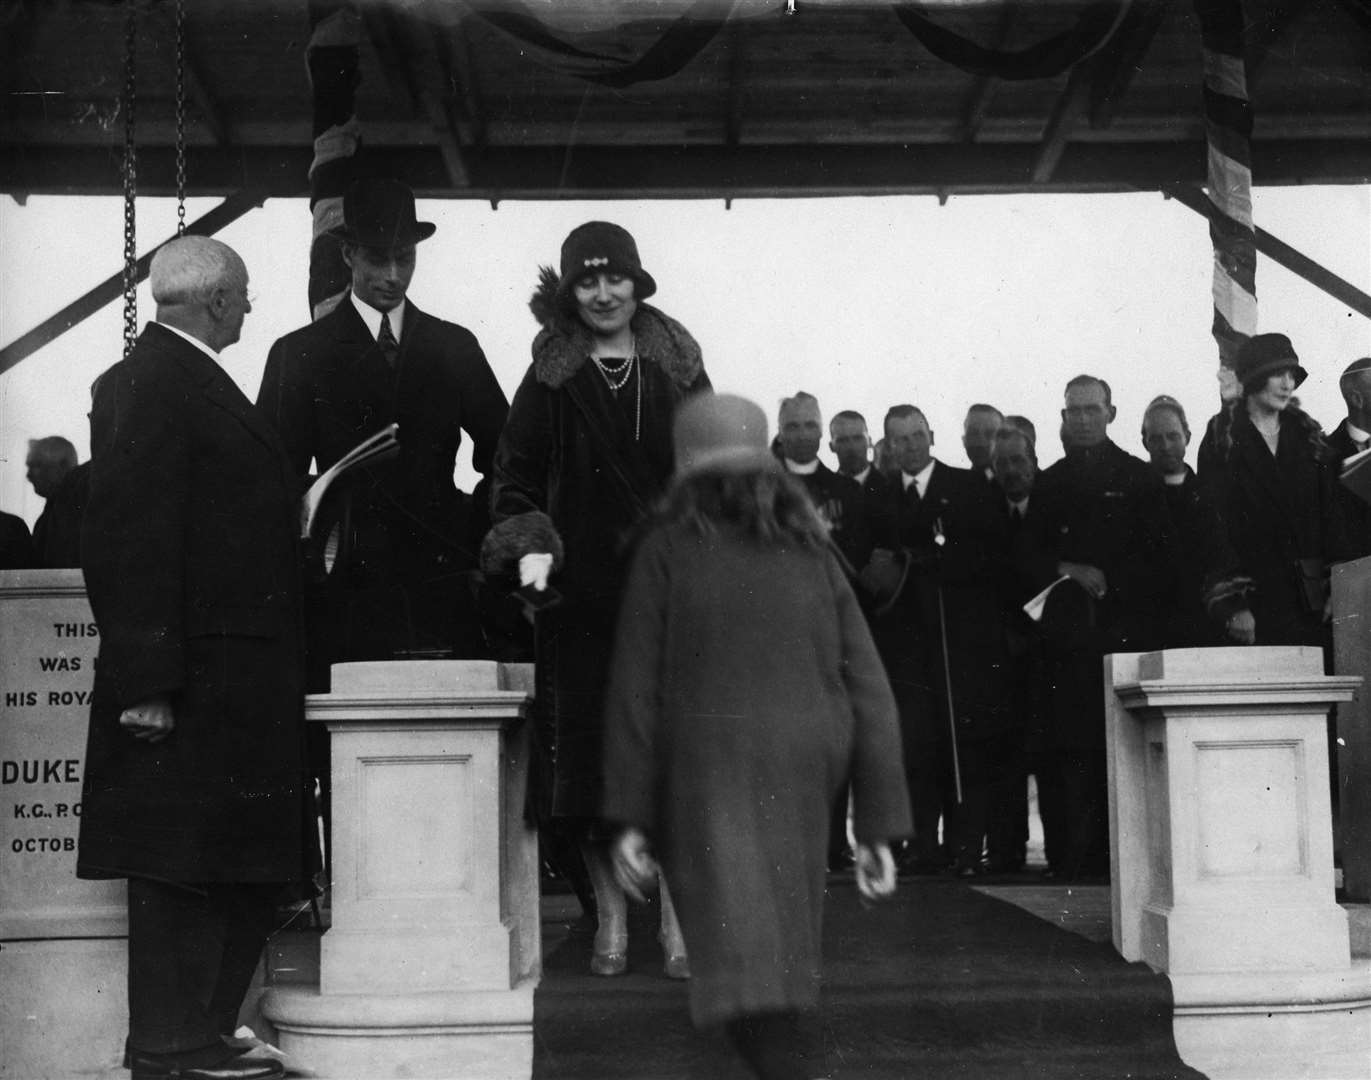 The Duke and Duchess of York officially opened the Ashford Hospital on October 20th 1926